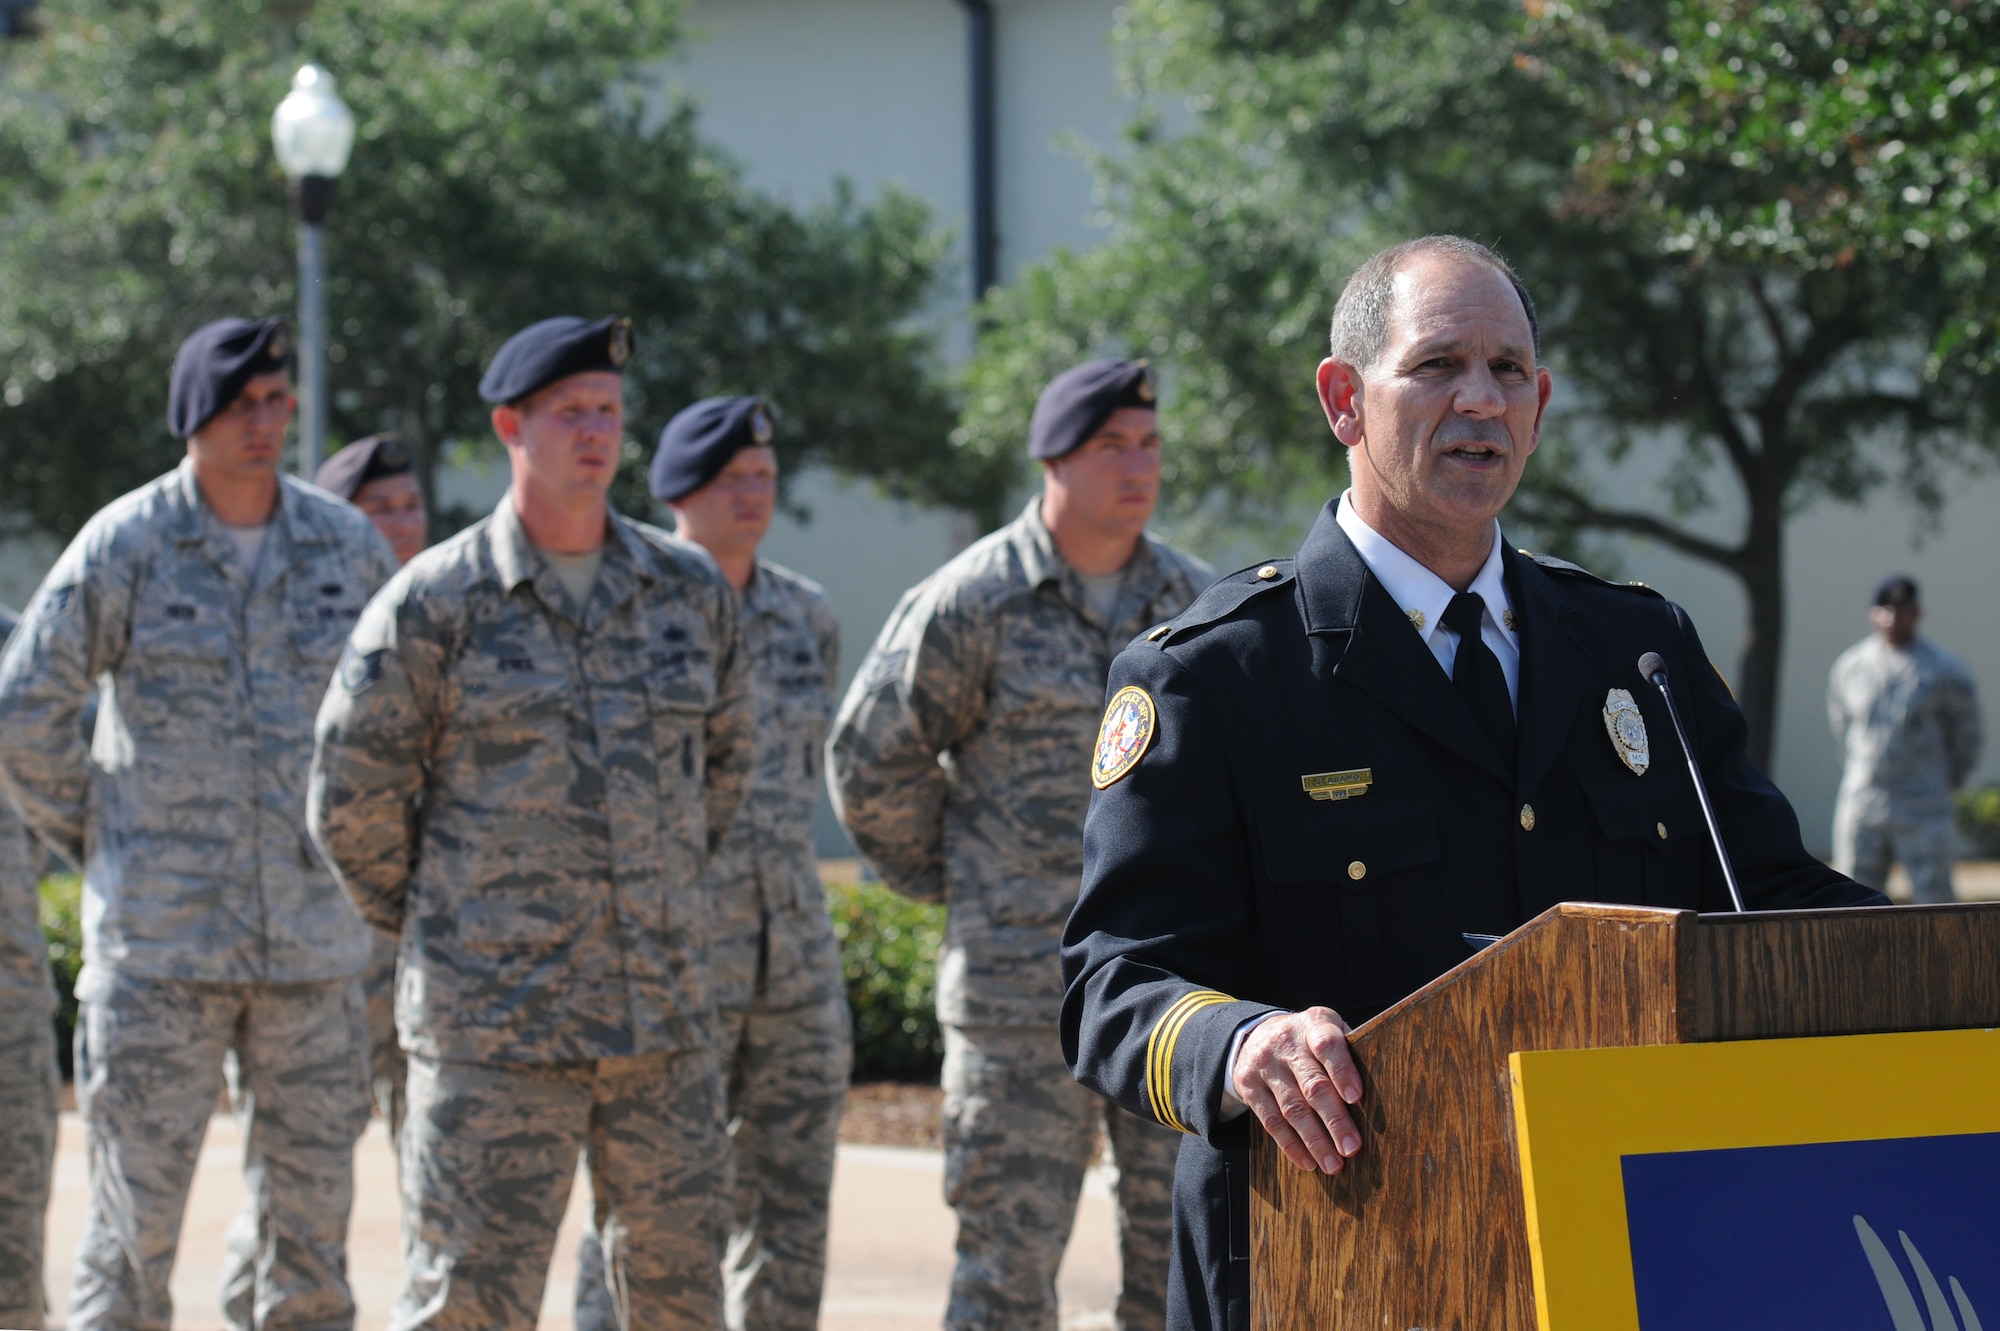 Major Jim Adamo, Biloxi Police Department patrol commander, delivers remarks during the 81st Security Forces Squadron Retreat Ceremony May 19, 2016, Keesler Air Force Base, Miss. The ceremony was held during National Police Week, which recognizes the service of law enforcement men and women who put their lives at risk every day. (U.S. Air Force photo by Kemberly Groue)